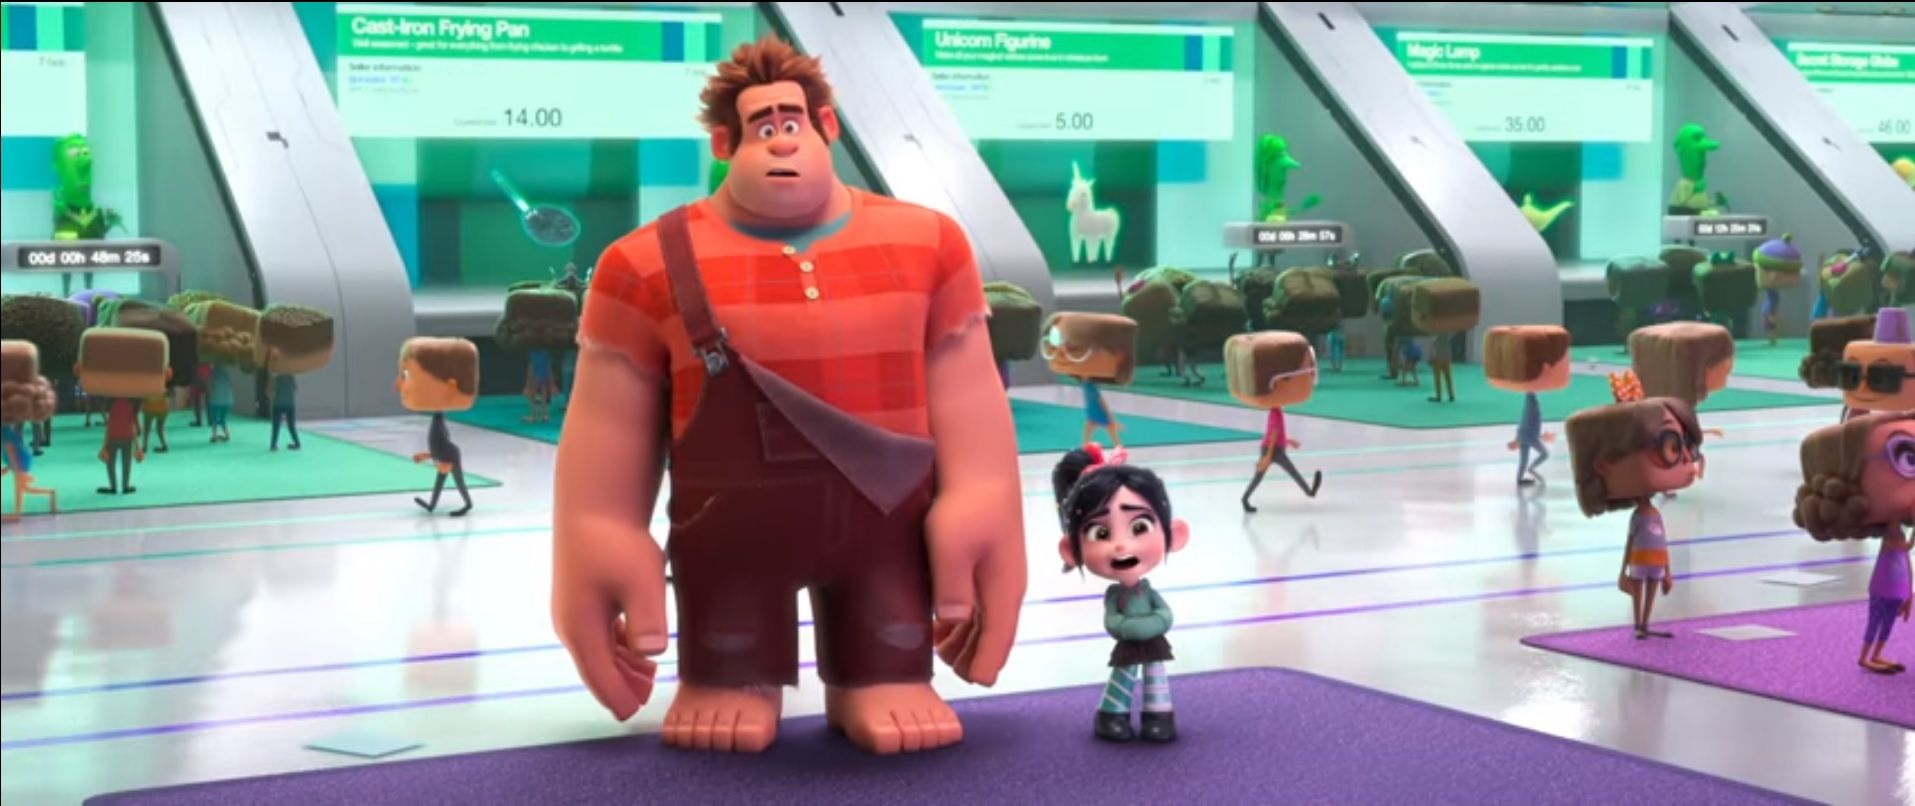 Gjennomgang: Ralph Breaks the Internet Is a Meme come to life with a Surprising Message